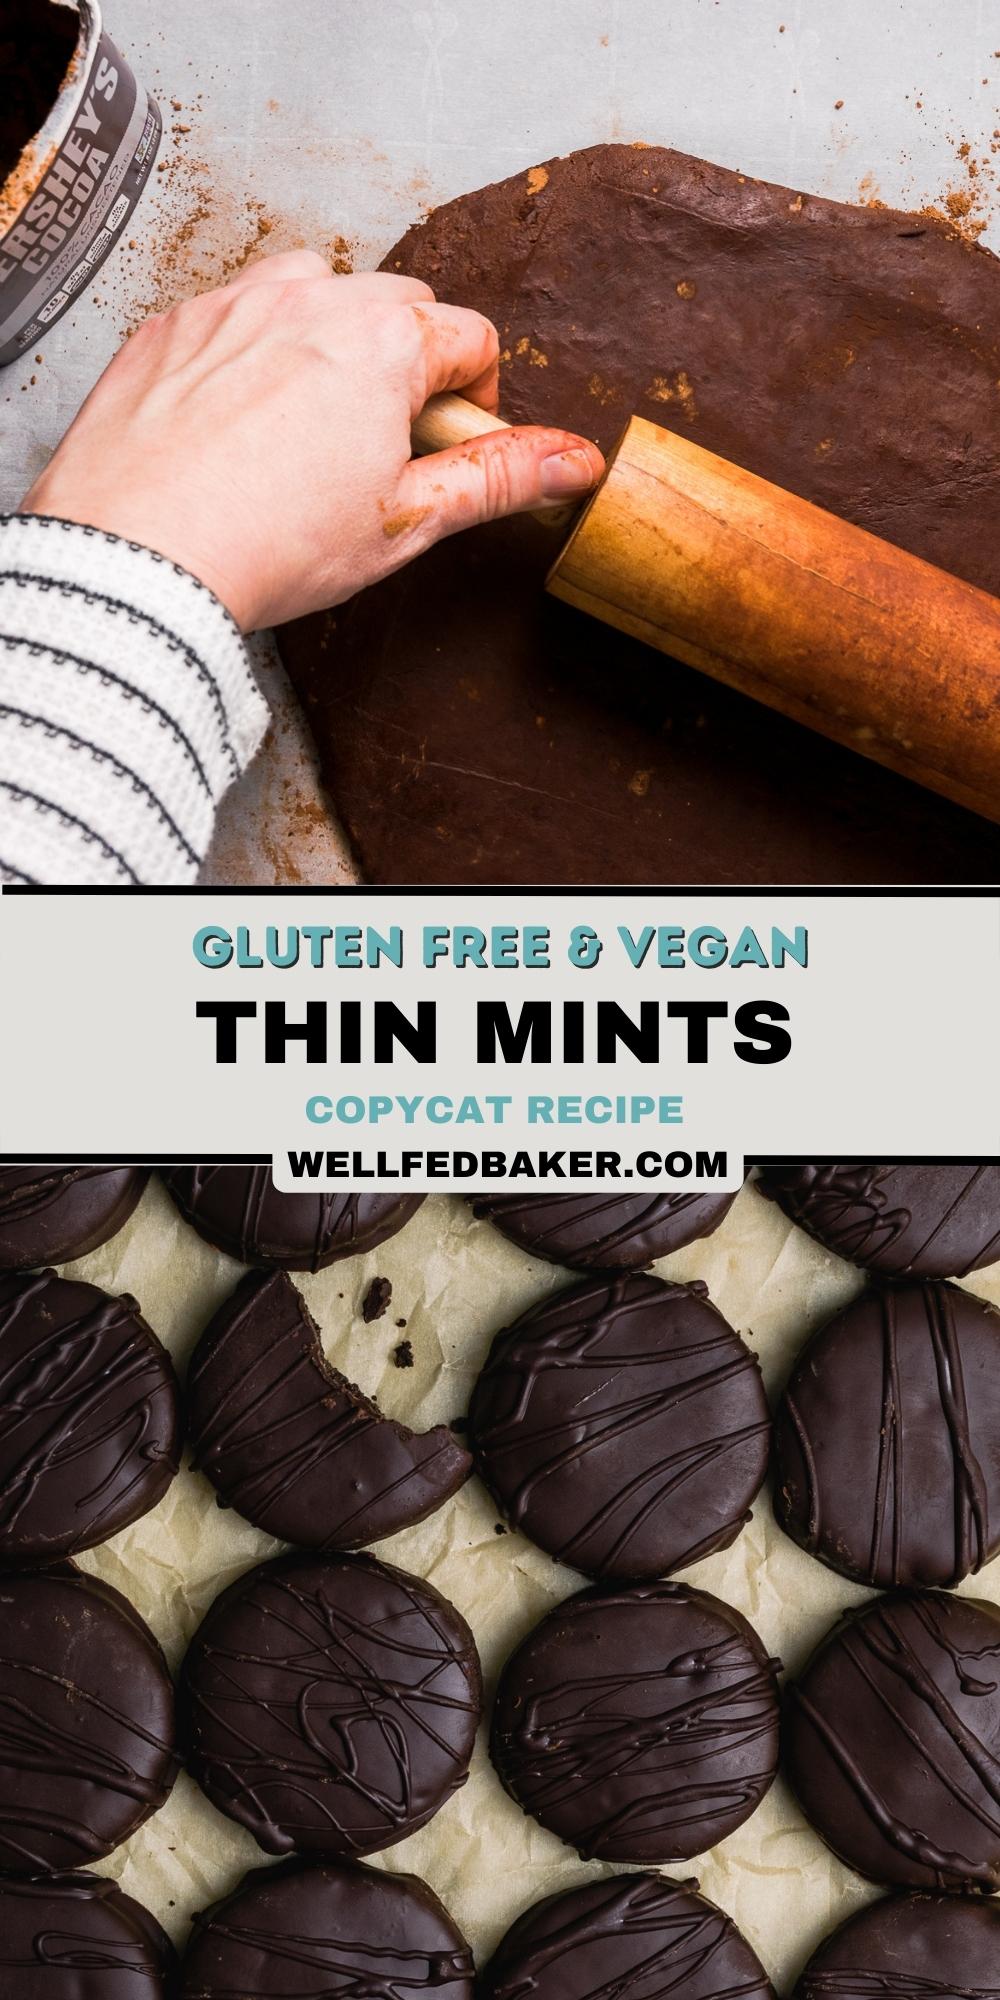 Pin for gluten free thin mints.